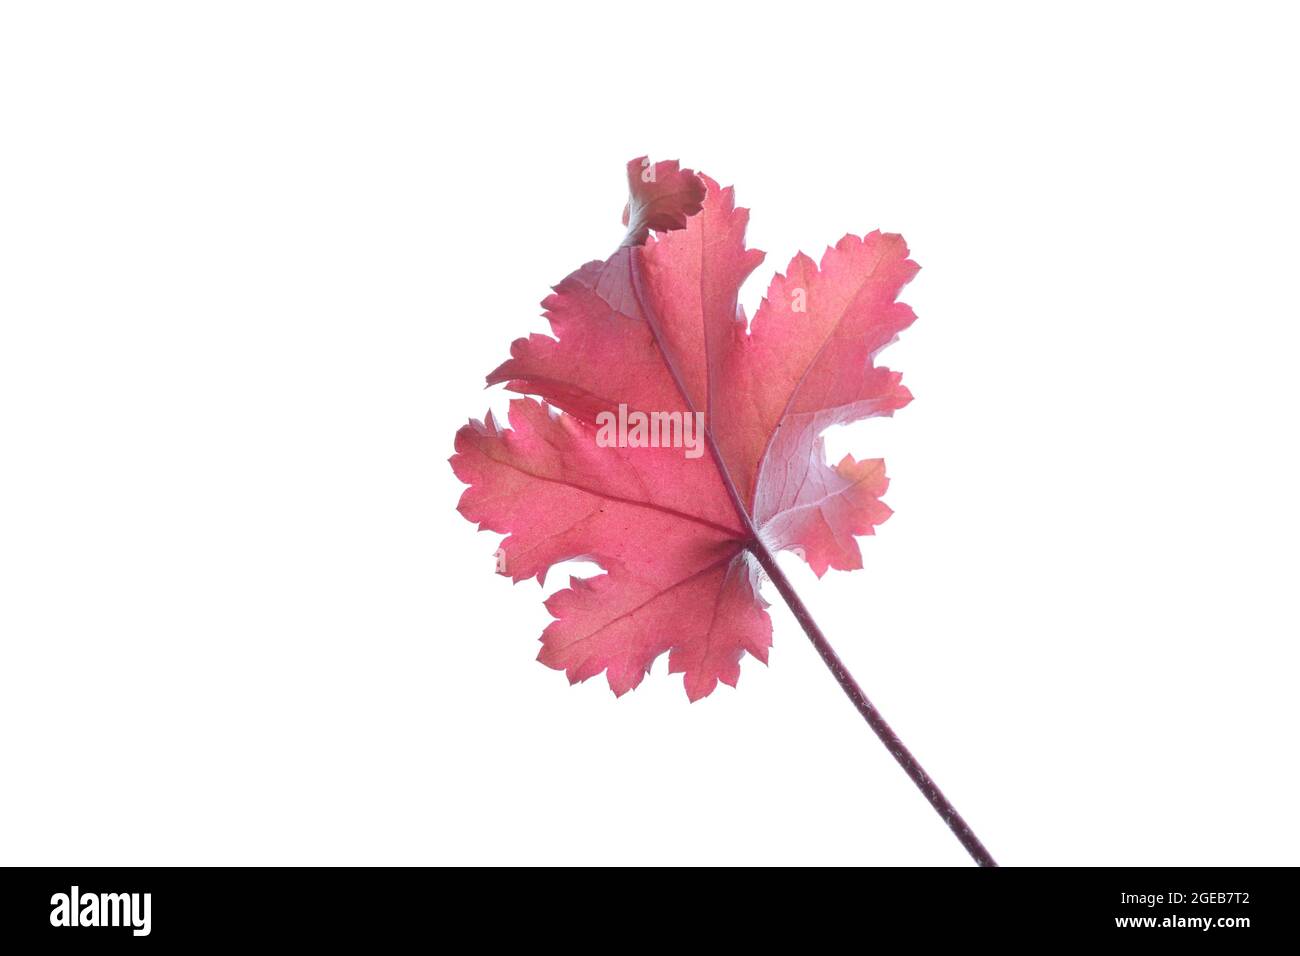 Single leaf and stem of a Heuchera Creme Brulee plant photographed against a white background Stock Photo